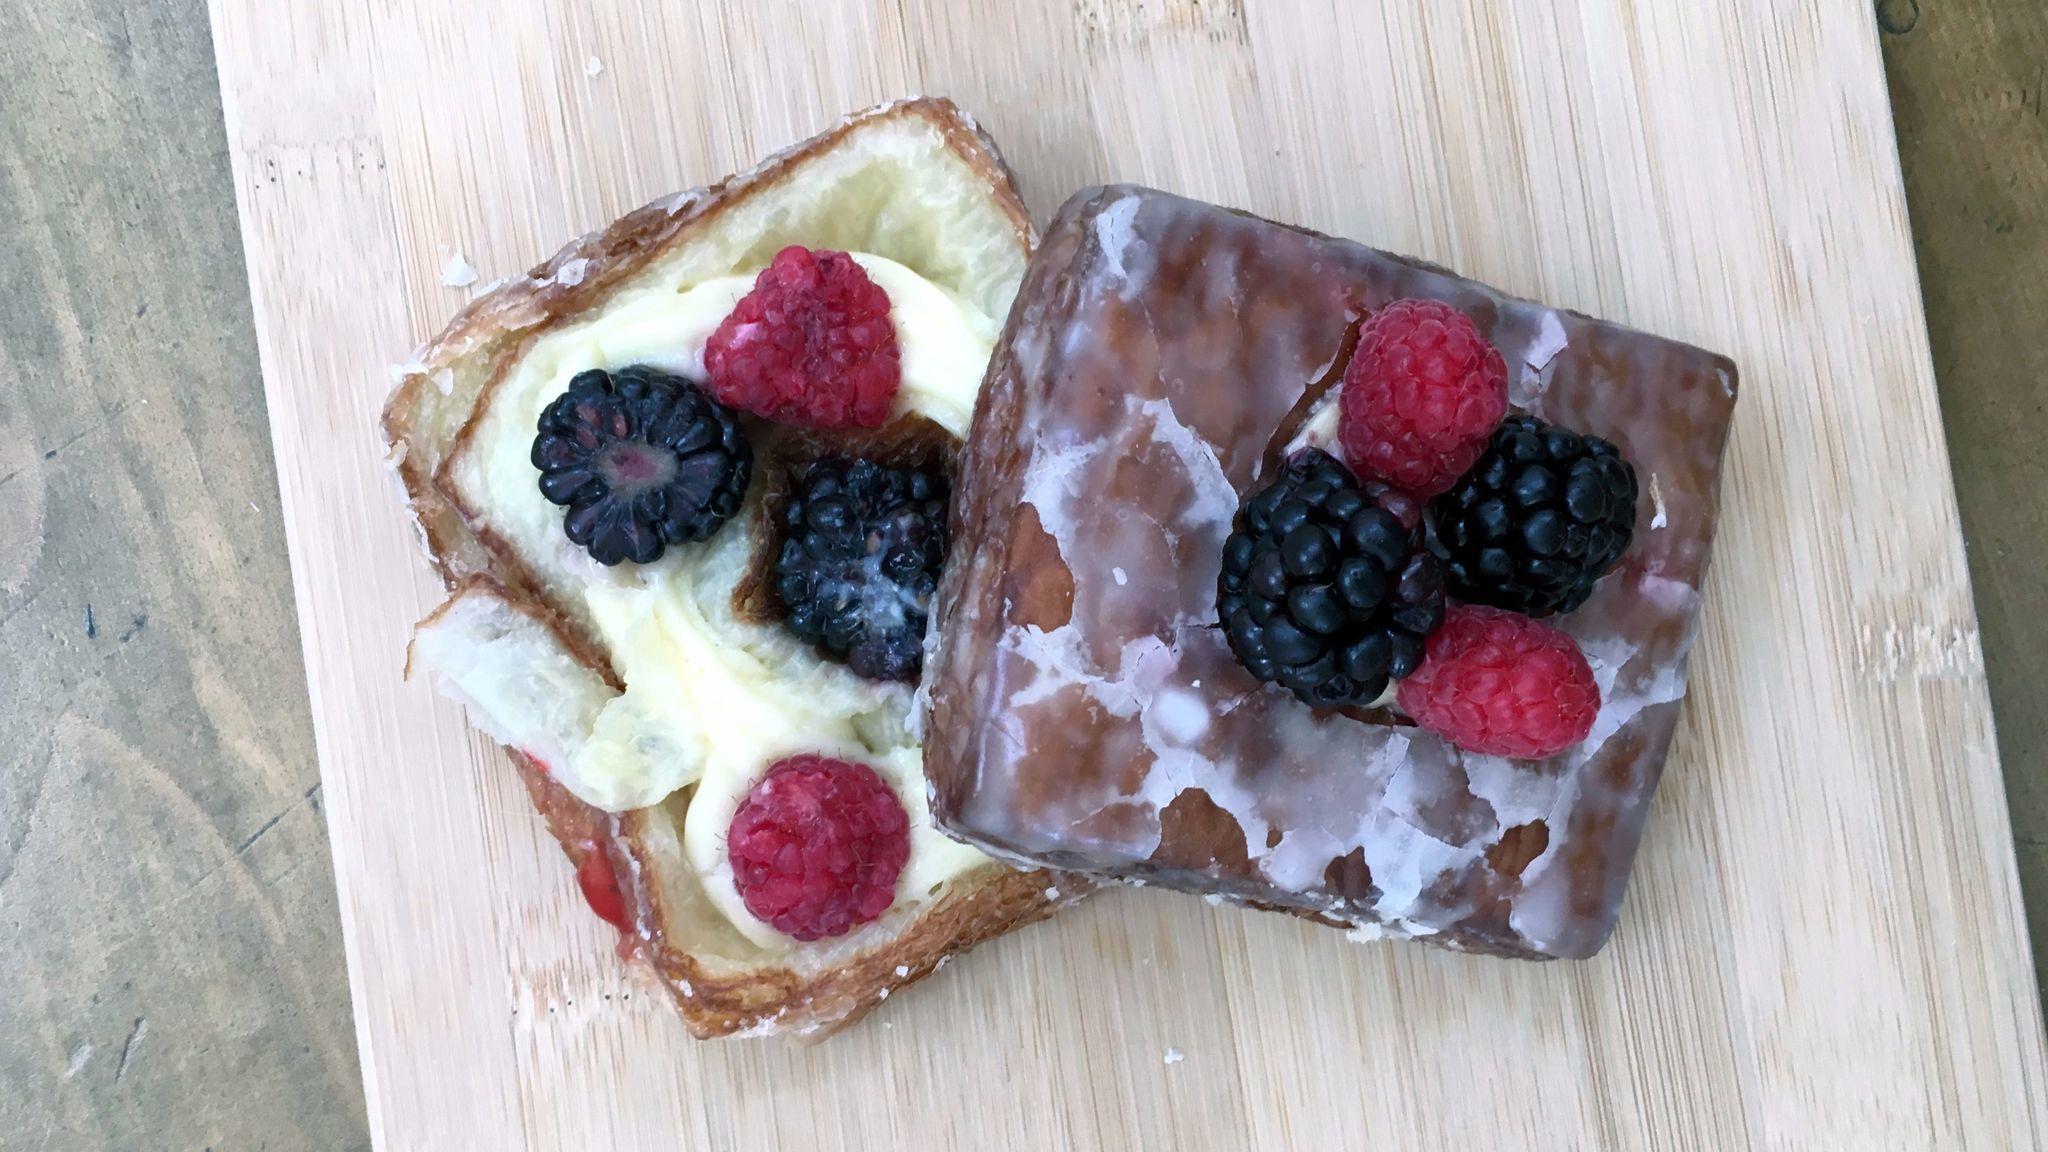 Custard and berries croissant doughnut from Colorado Donuts.